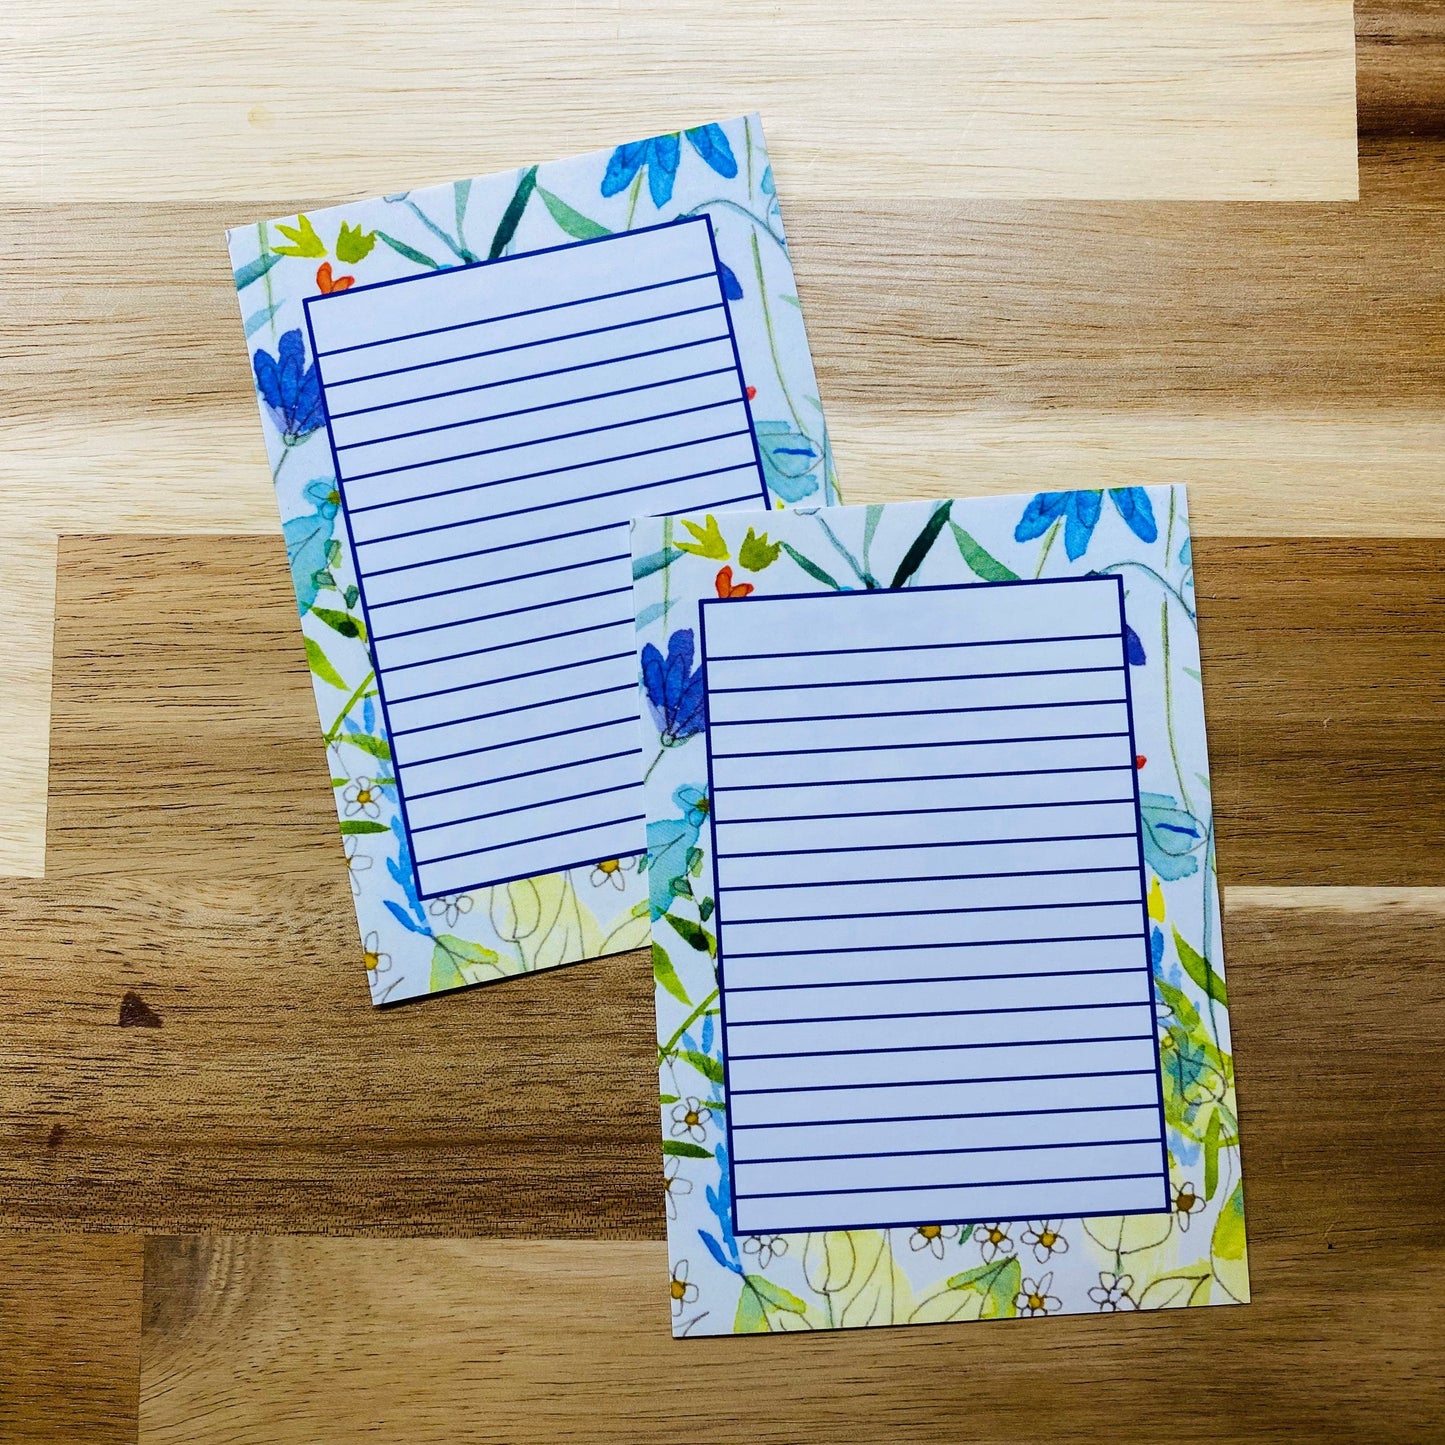 Fishpond Squared/Grid A5 Notebook (100% recycled)